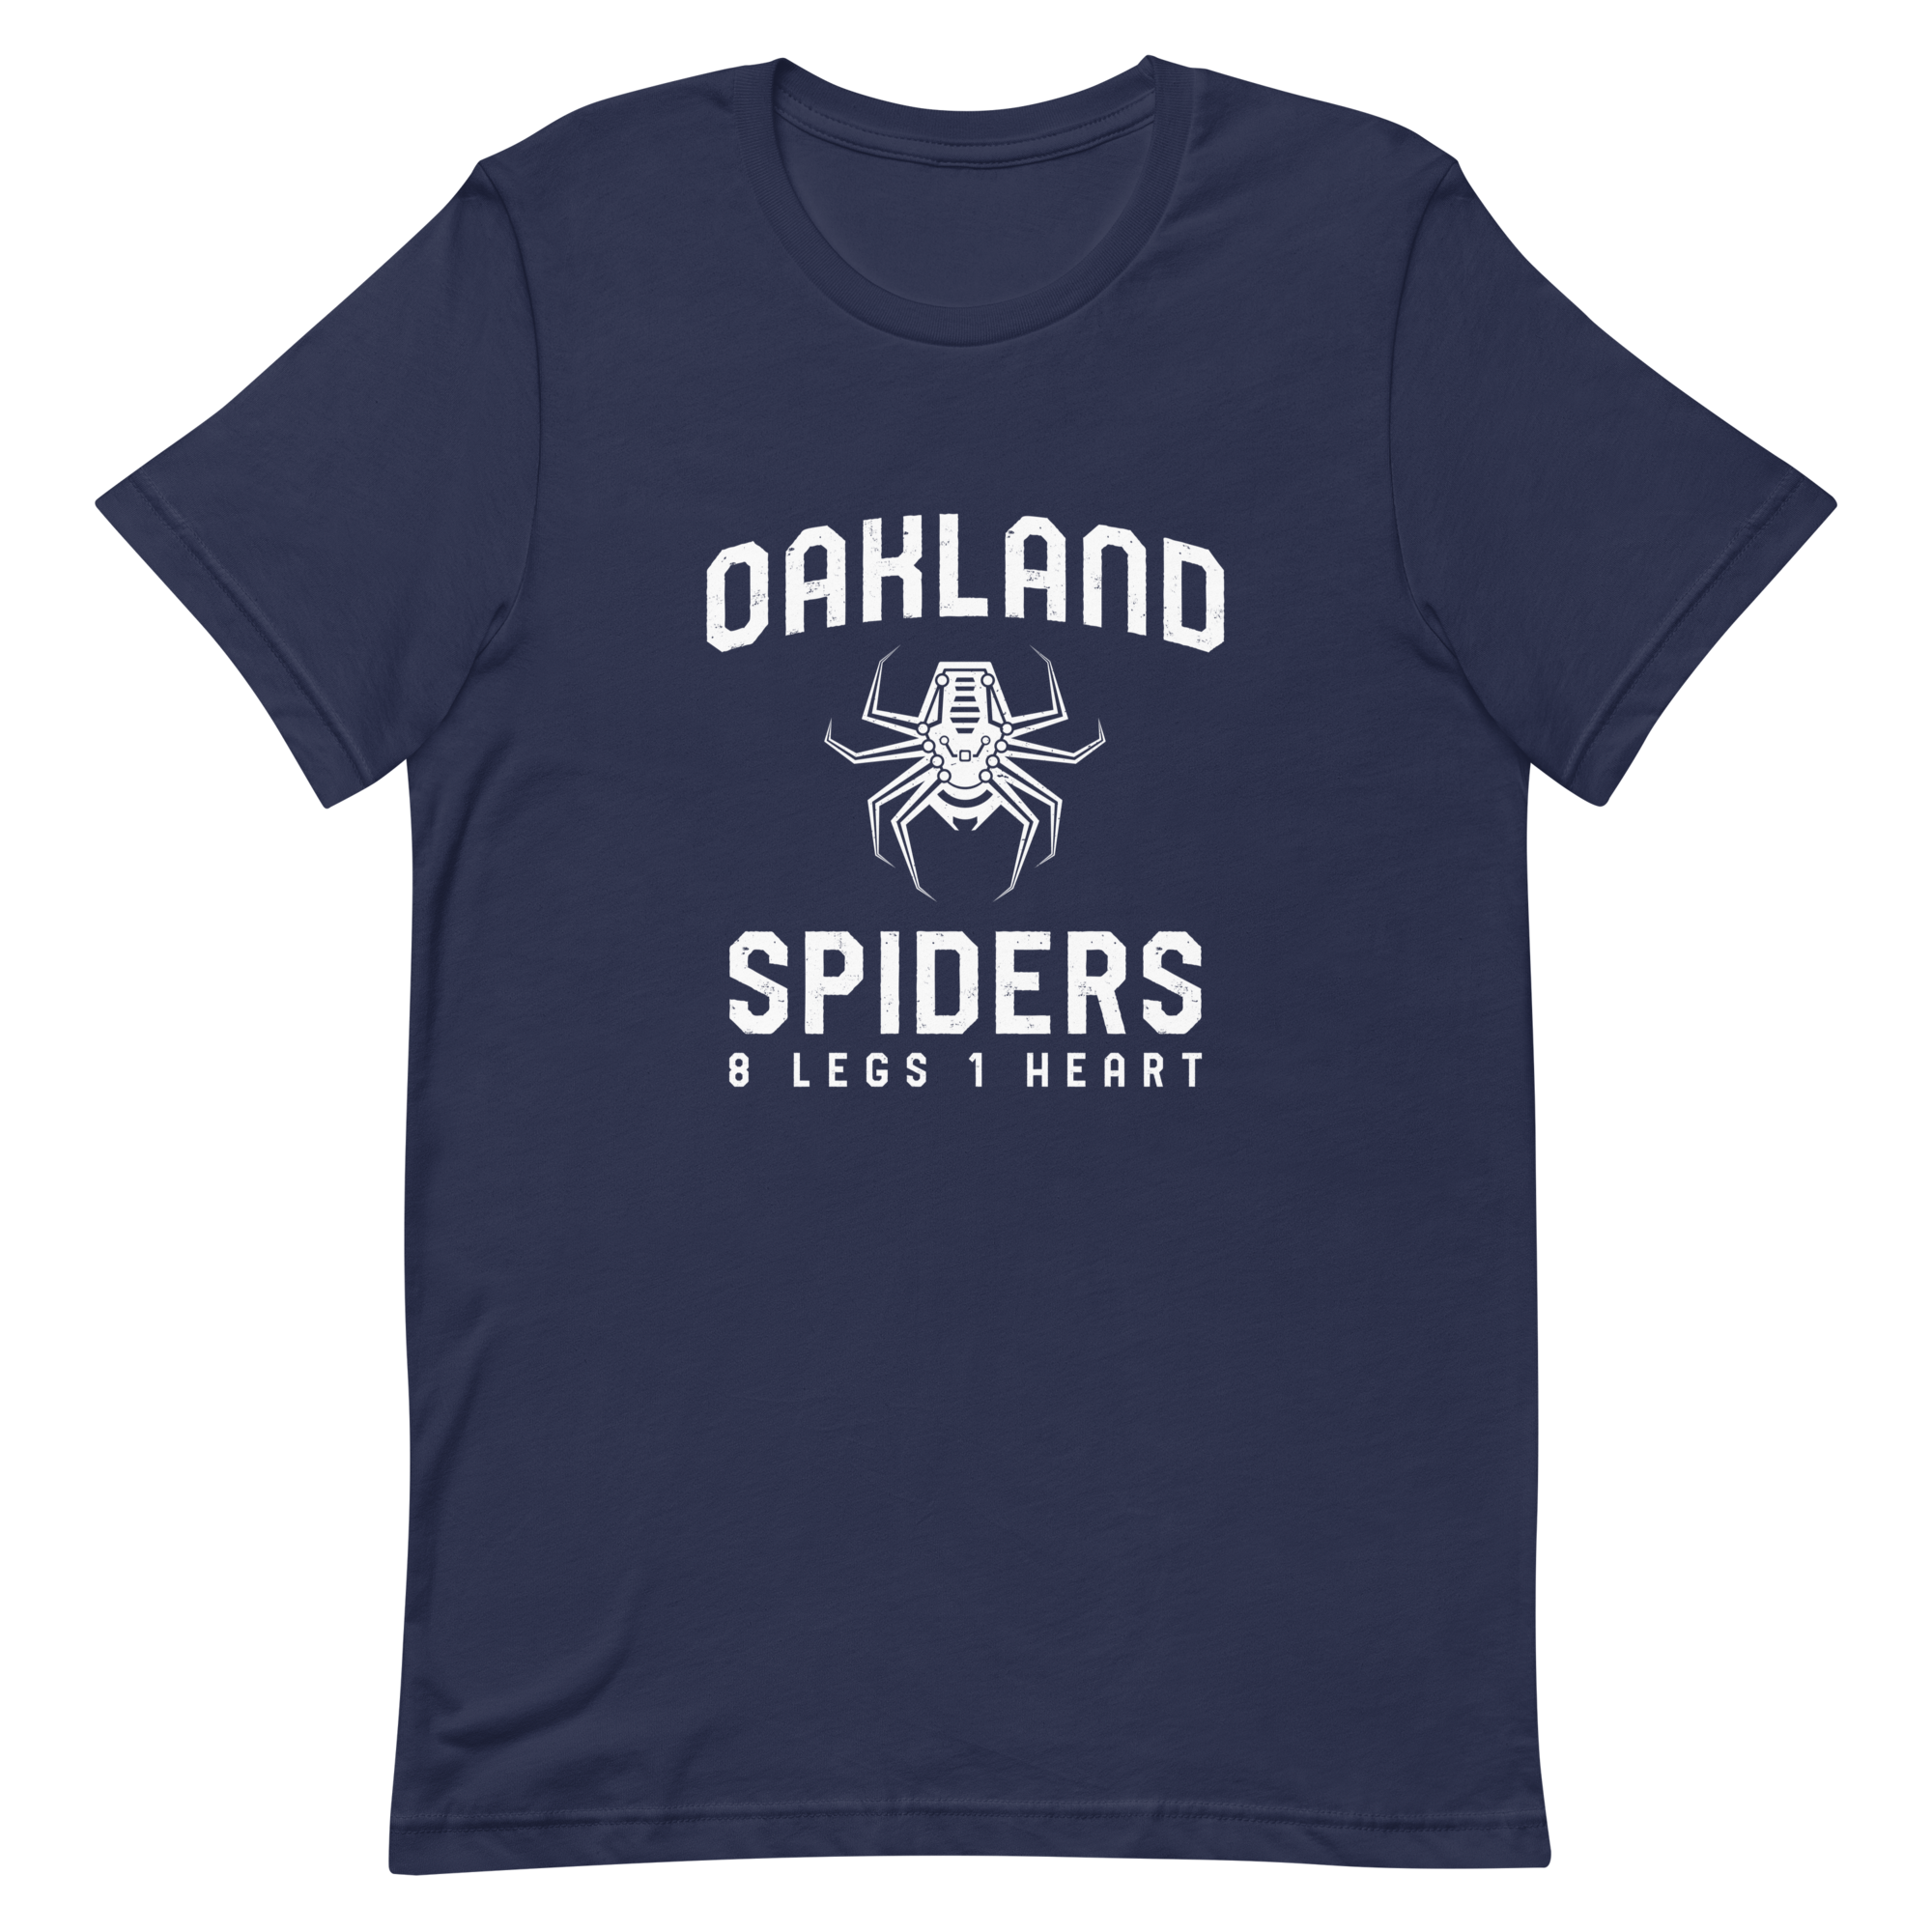 Oakland Spiders Tee- White Print